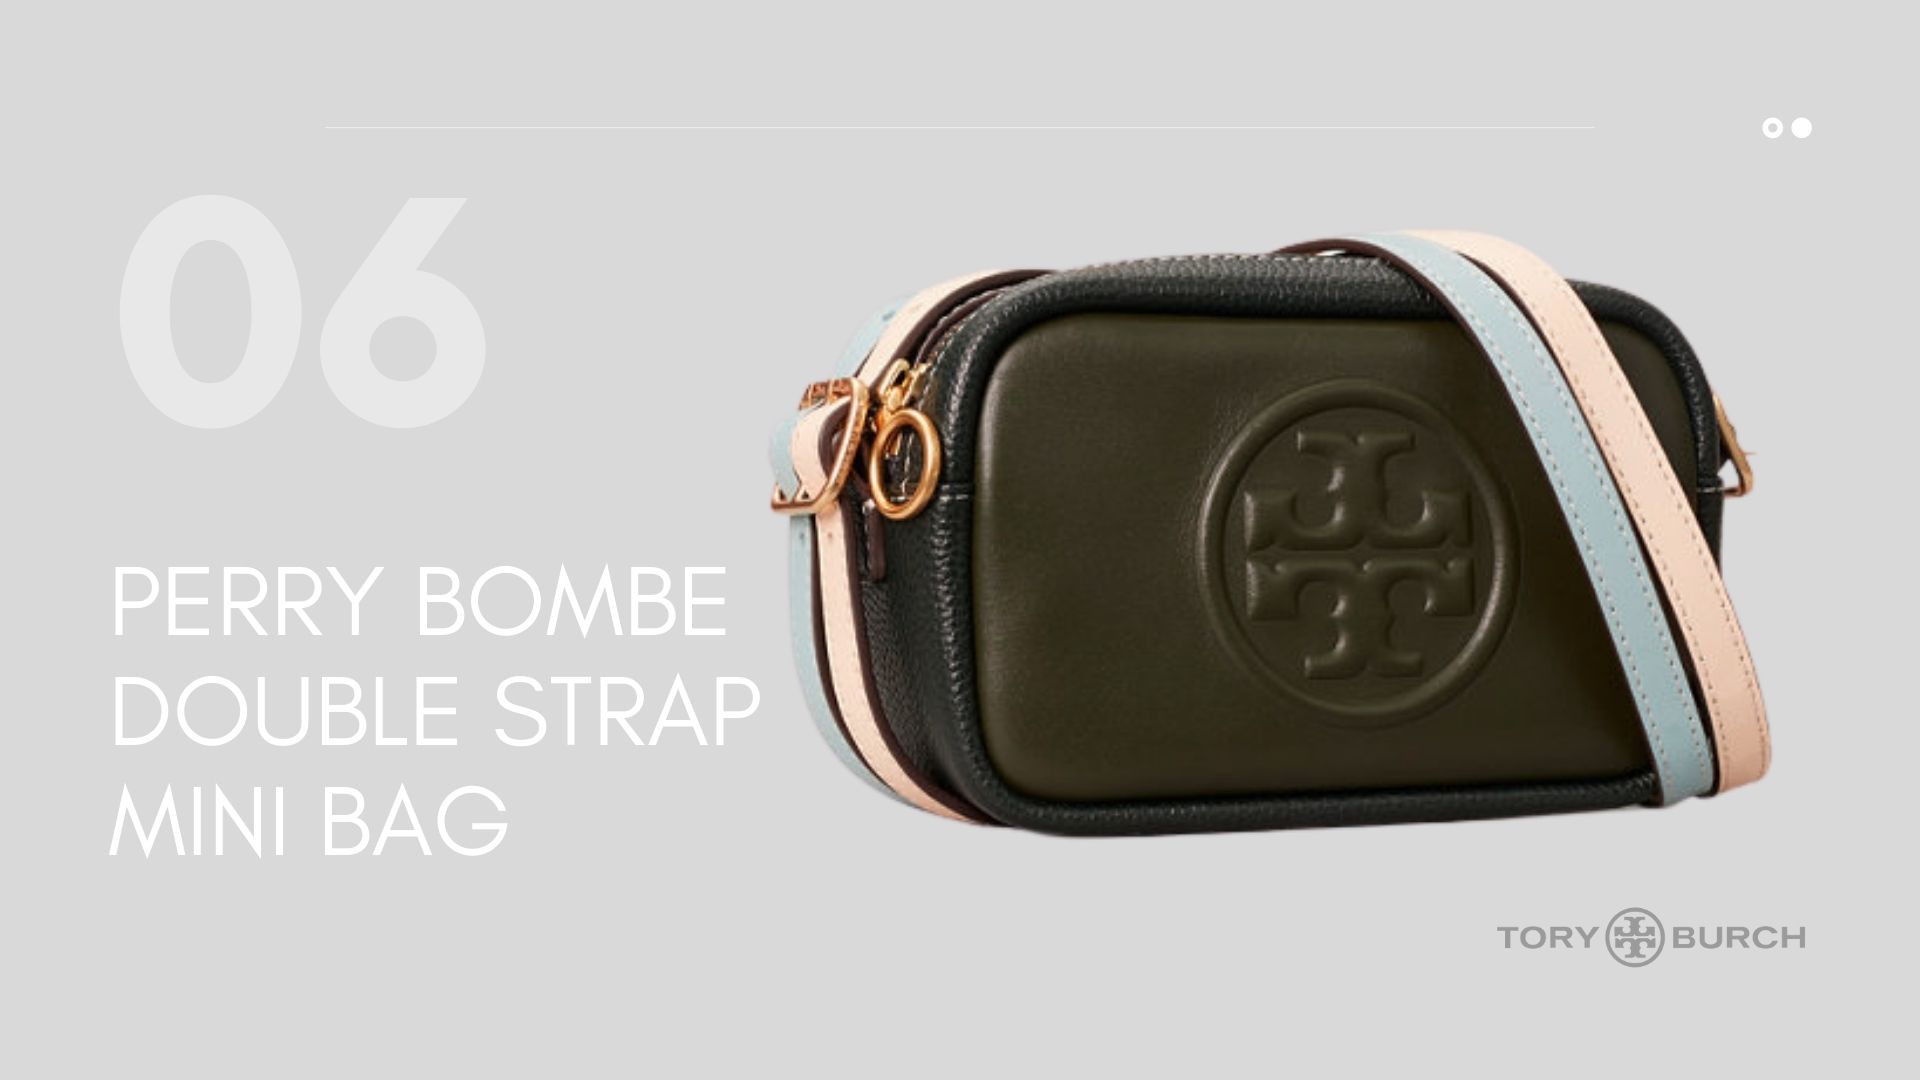 Perry Bombe Double Strap Mini -tory burch ราคา-tory burch thailand-tory burch bag-tory burch กระเป๋า-tory burch ราคา-tory burch thailand-tory burch bag-tory burch กระเป๋า-tory burch ราคา-tory burch thailand-tory burch bag-tory burch กระเป๋า-เปิดราคา tory burch-ราคา tory burch-ราคา tory burch ในไทย-กระเป๋า tory burch ราคา